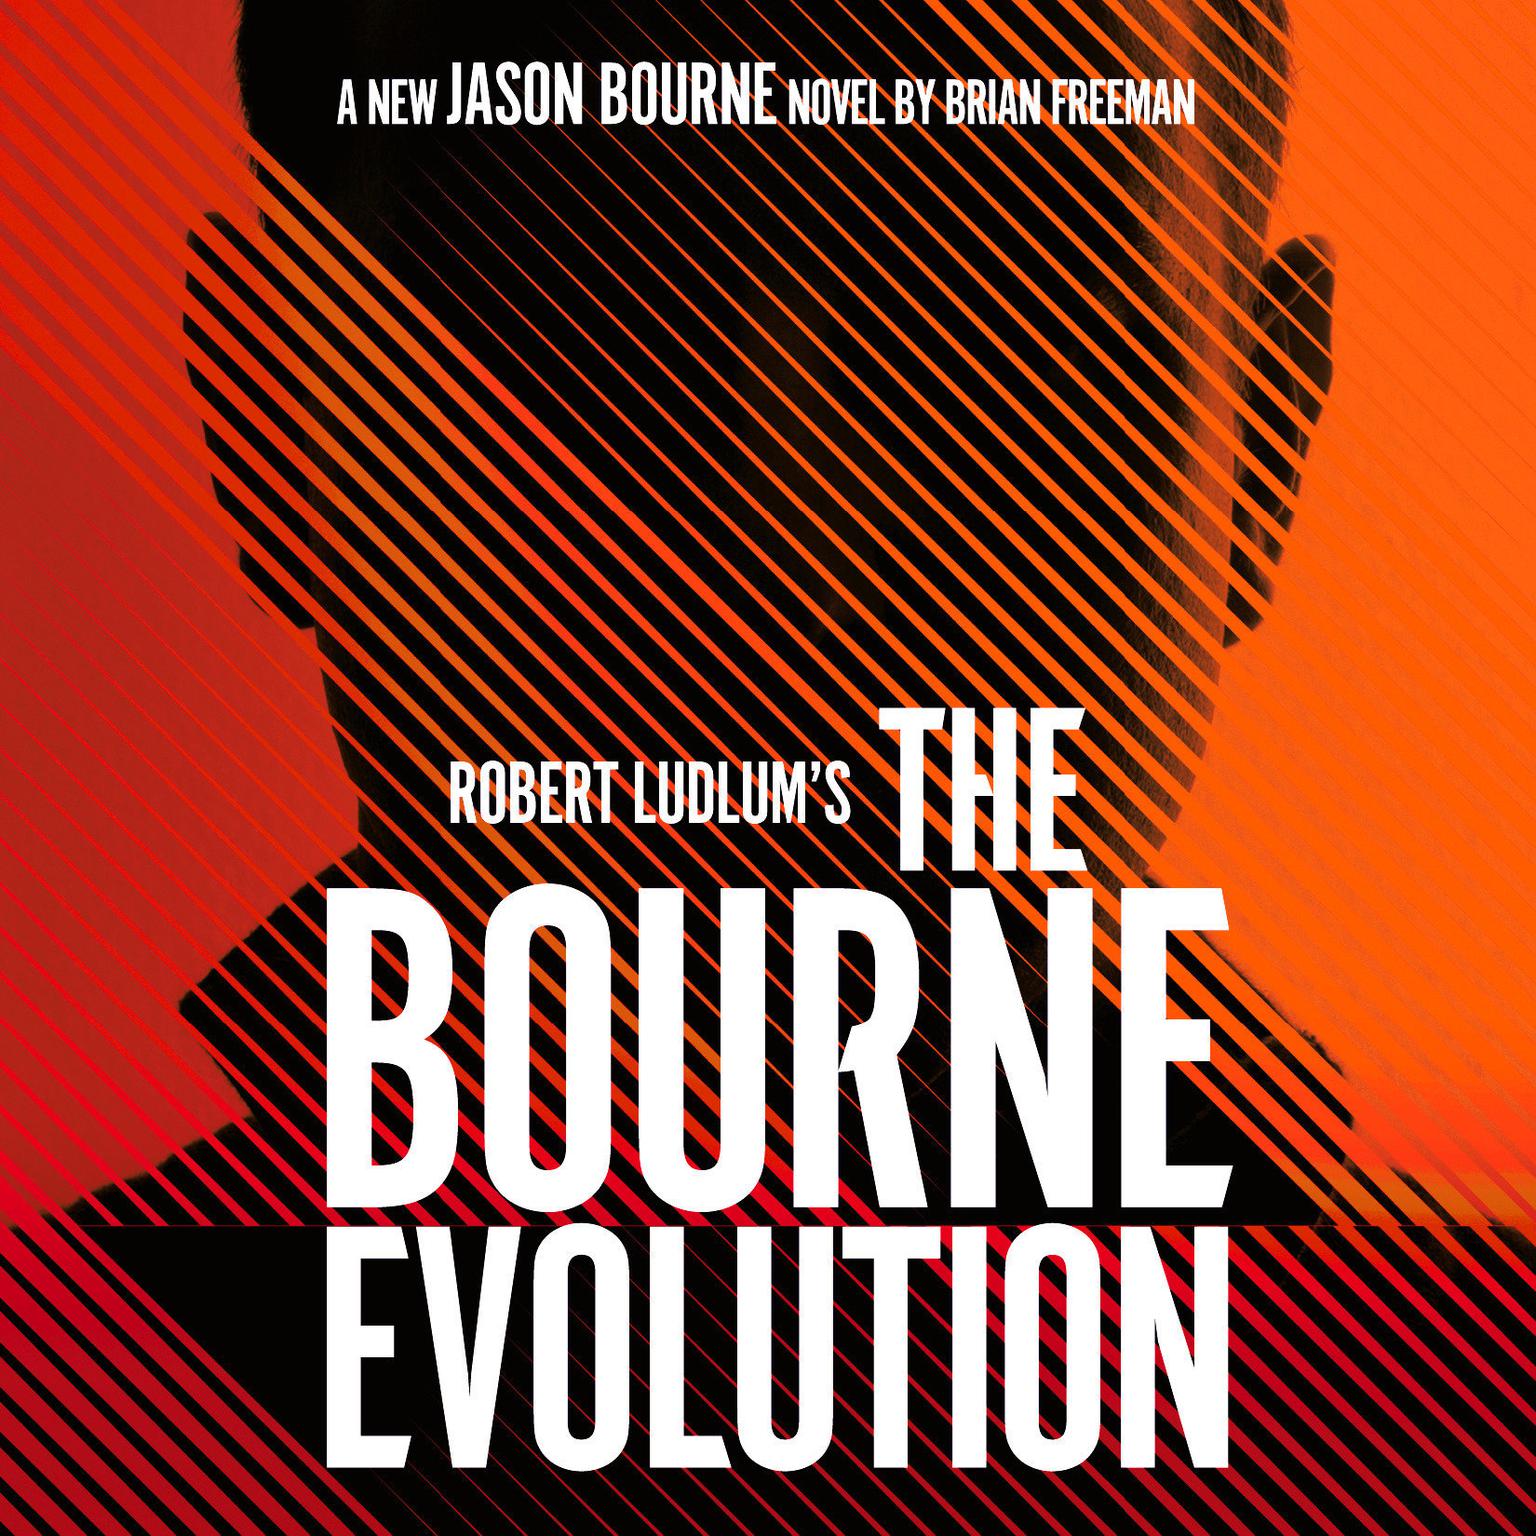 Robert Ludlums The Bourne Evolution Audiobook, by Brian Freeman